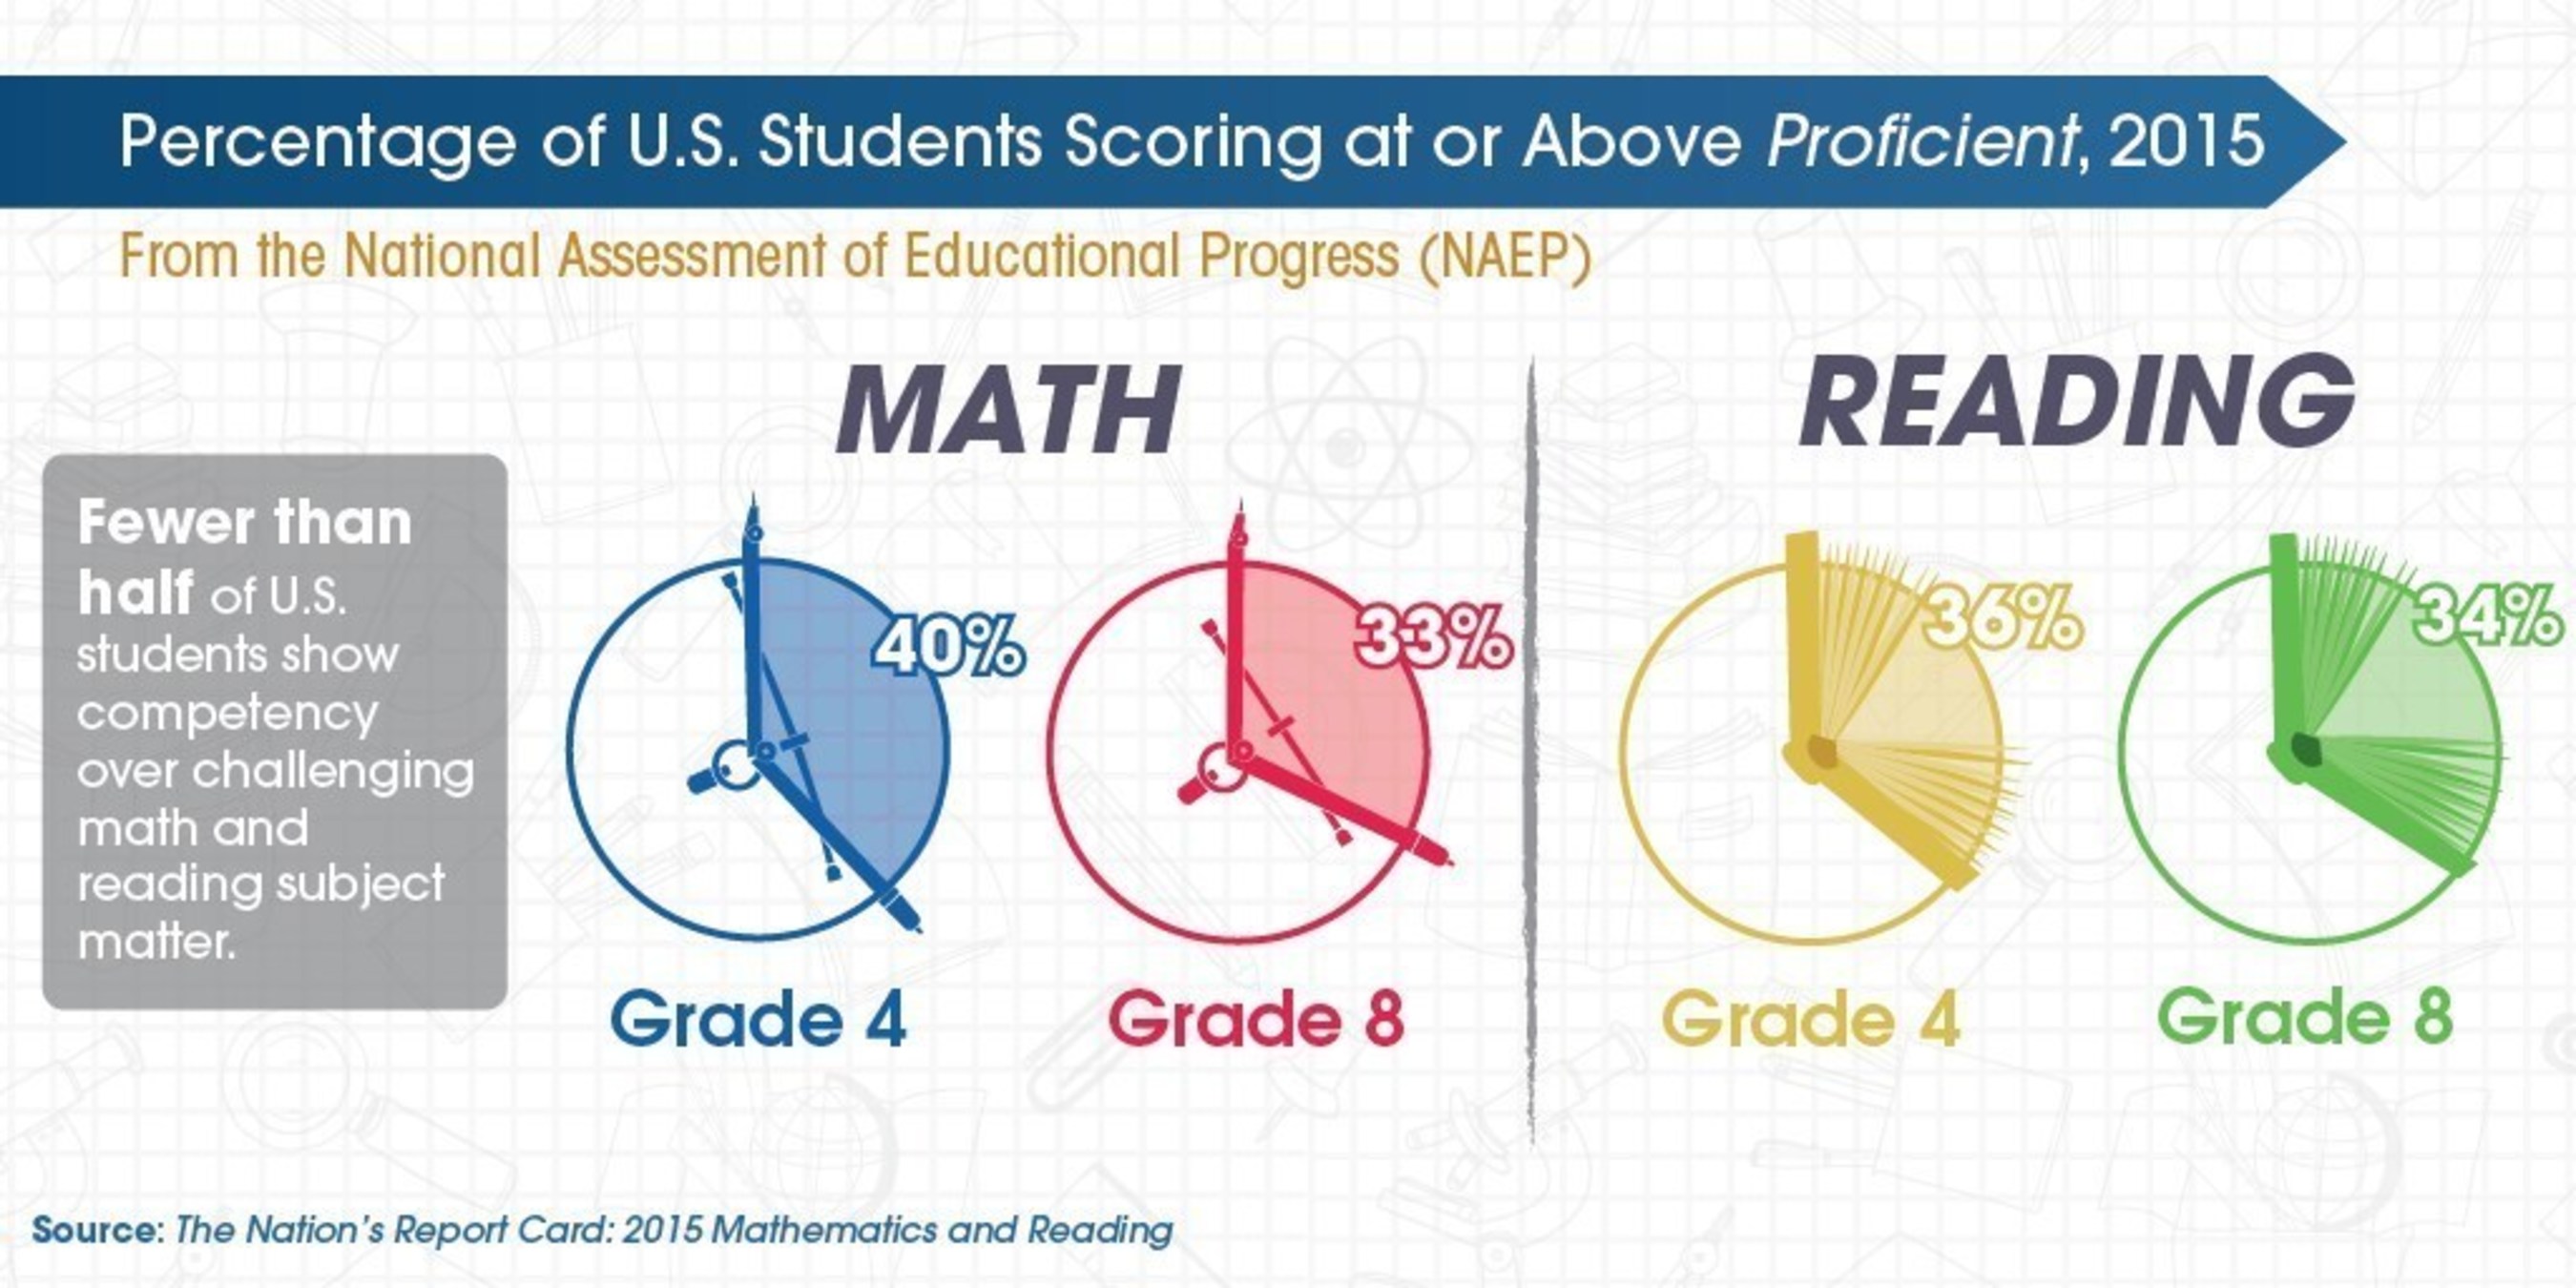 Fewer than half of U.S. students show competency over challenging math and reading subject matter.